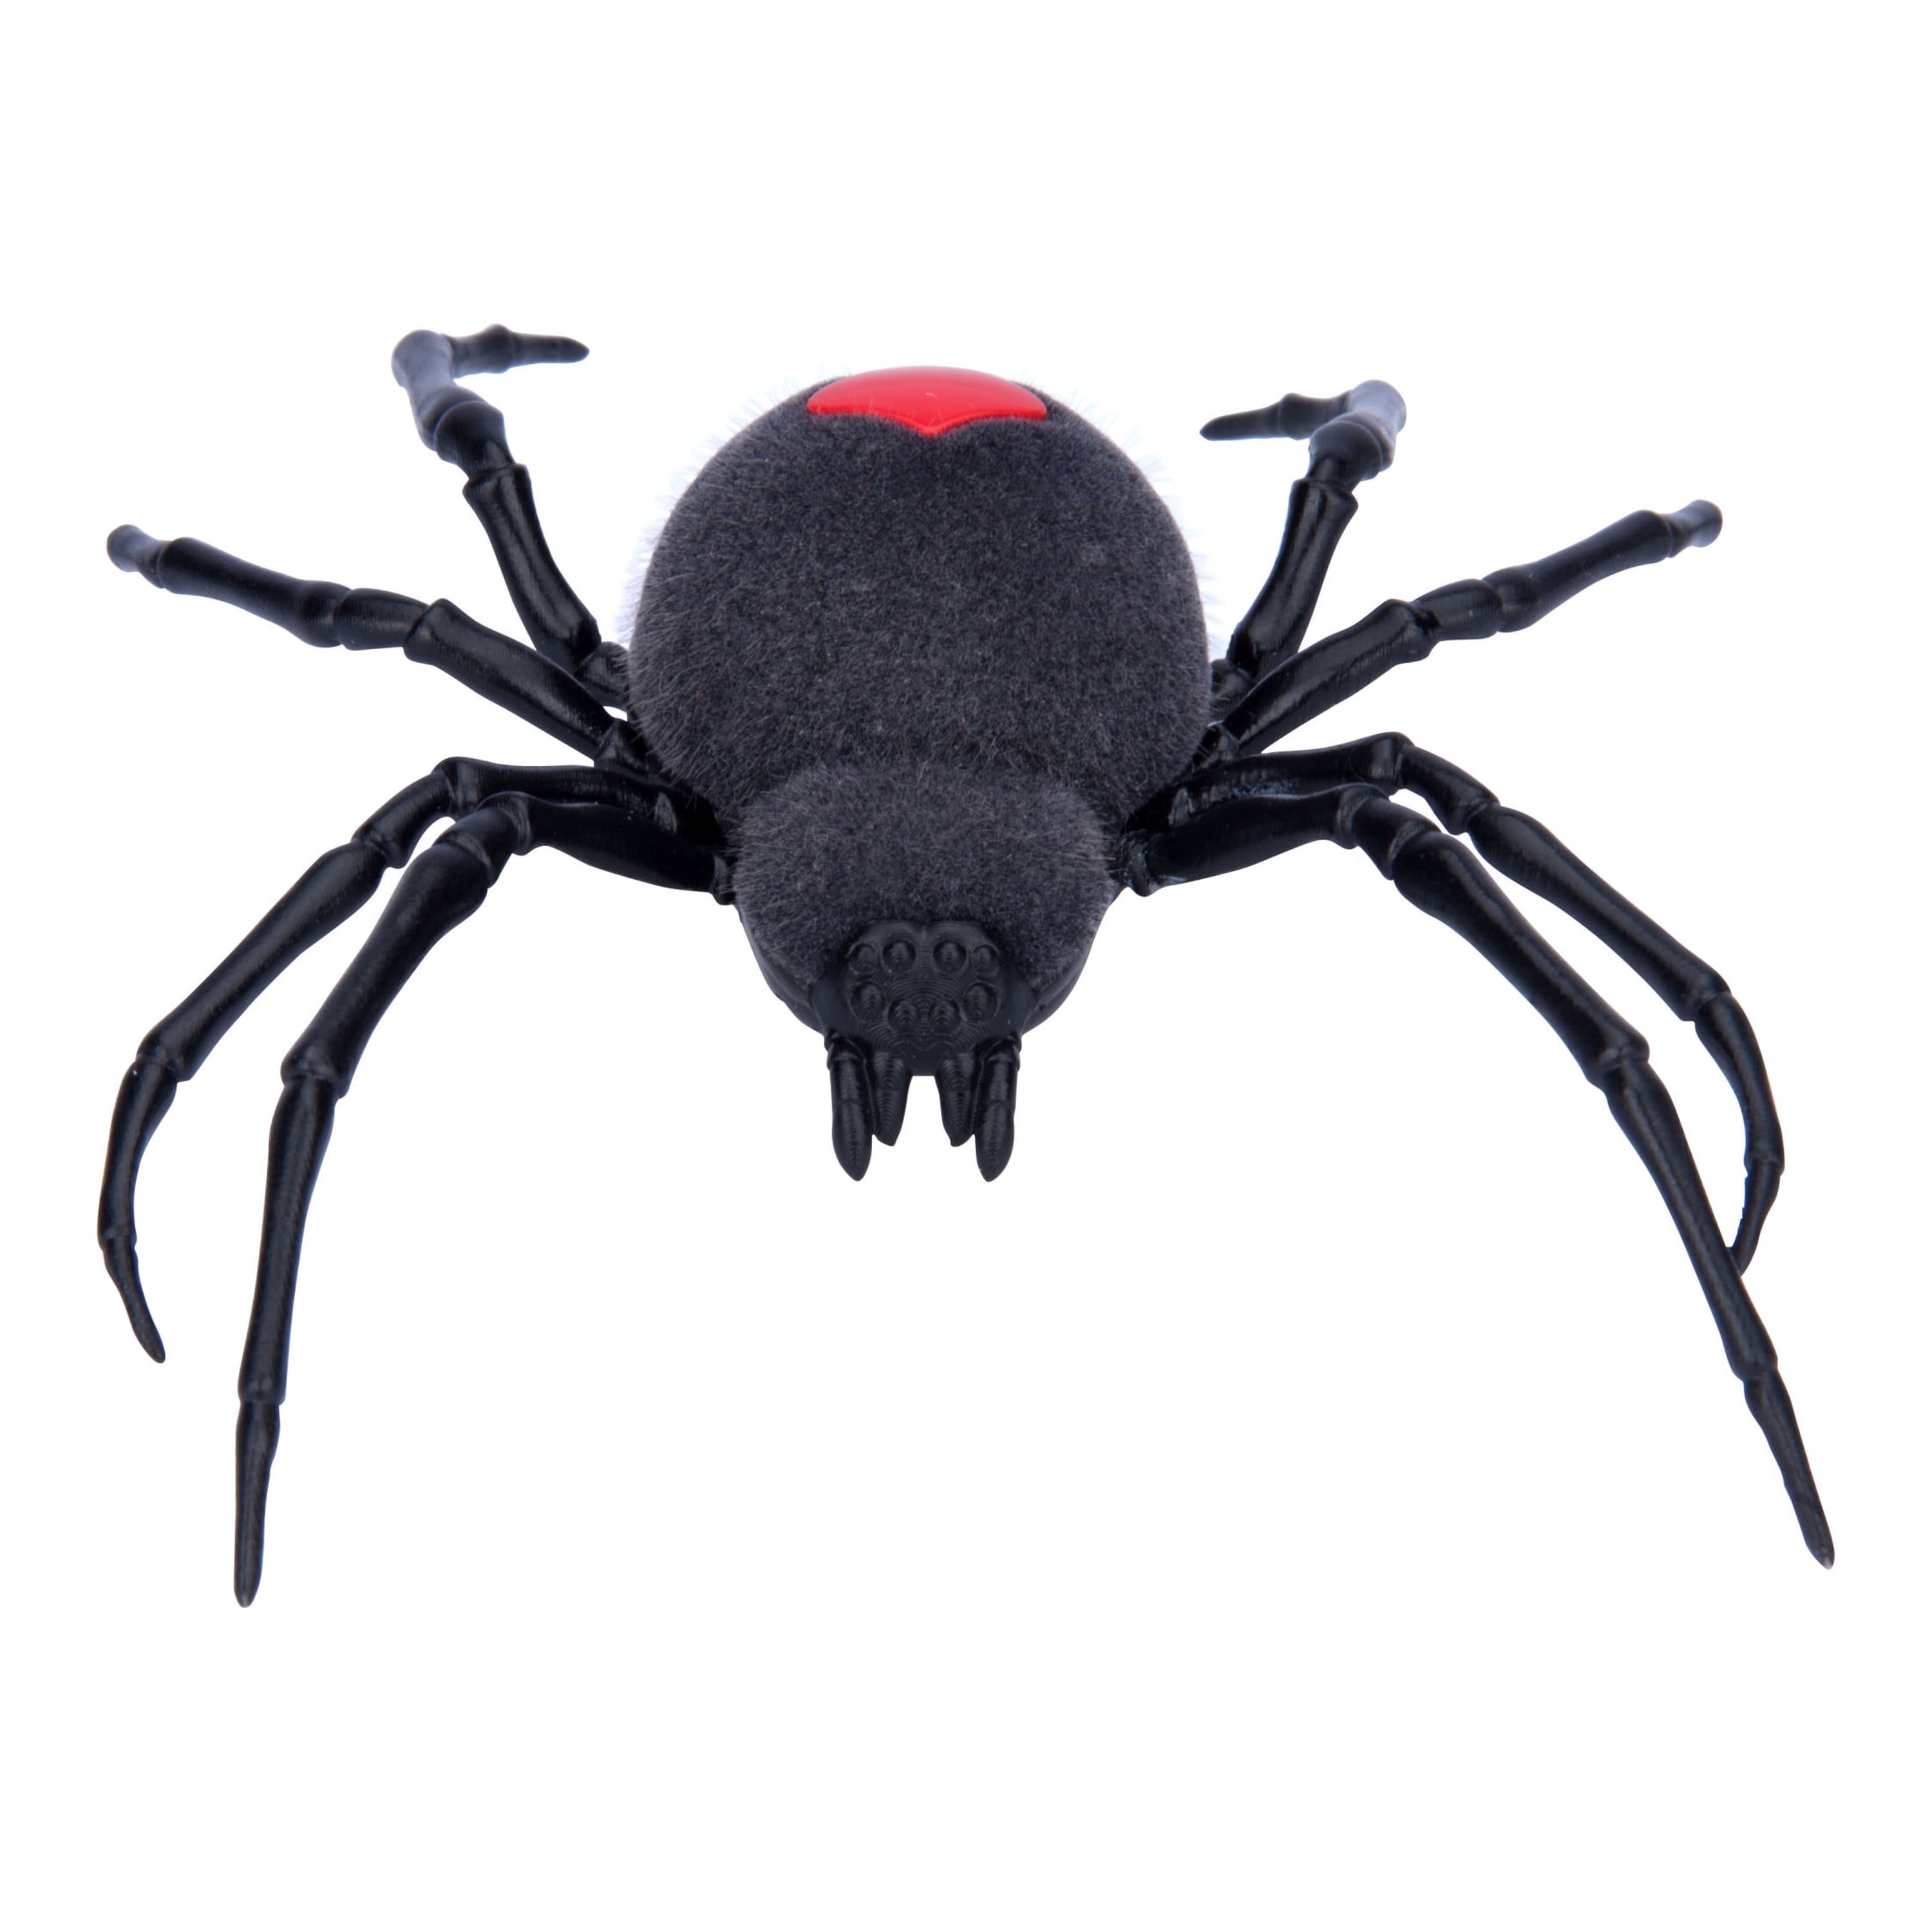 ZURU Robo Alive Battery Powered Crawling Spider Robotic Toy - Electronic Pet - image 1 of 8